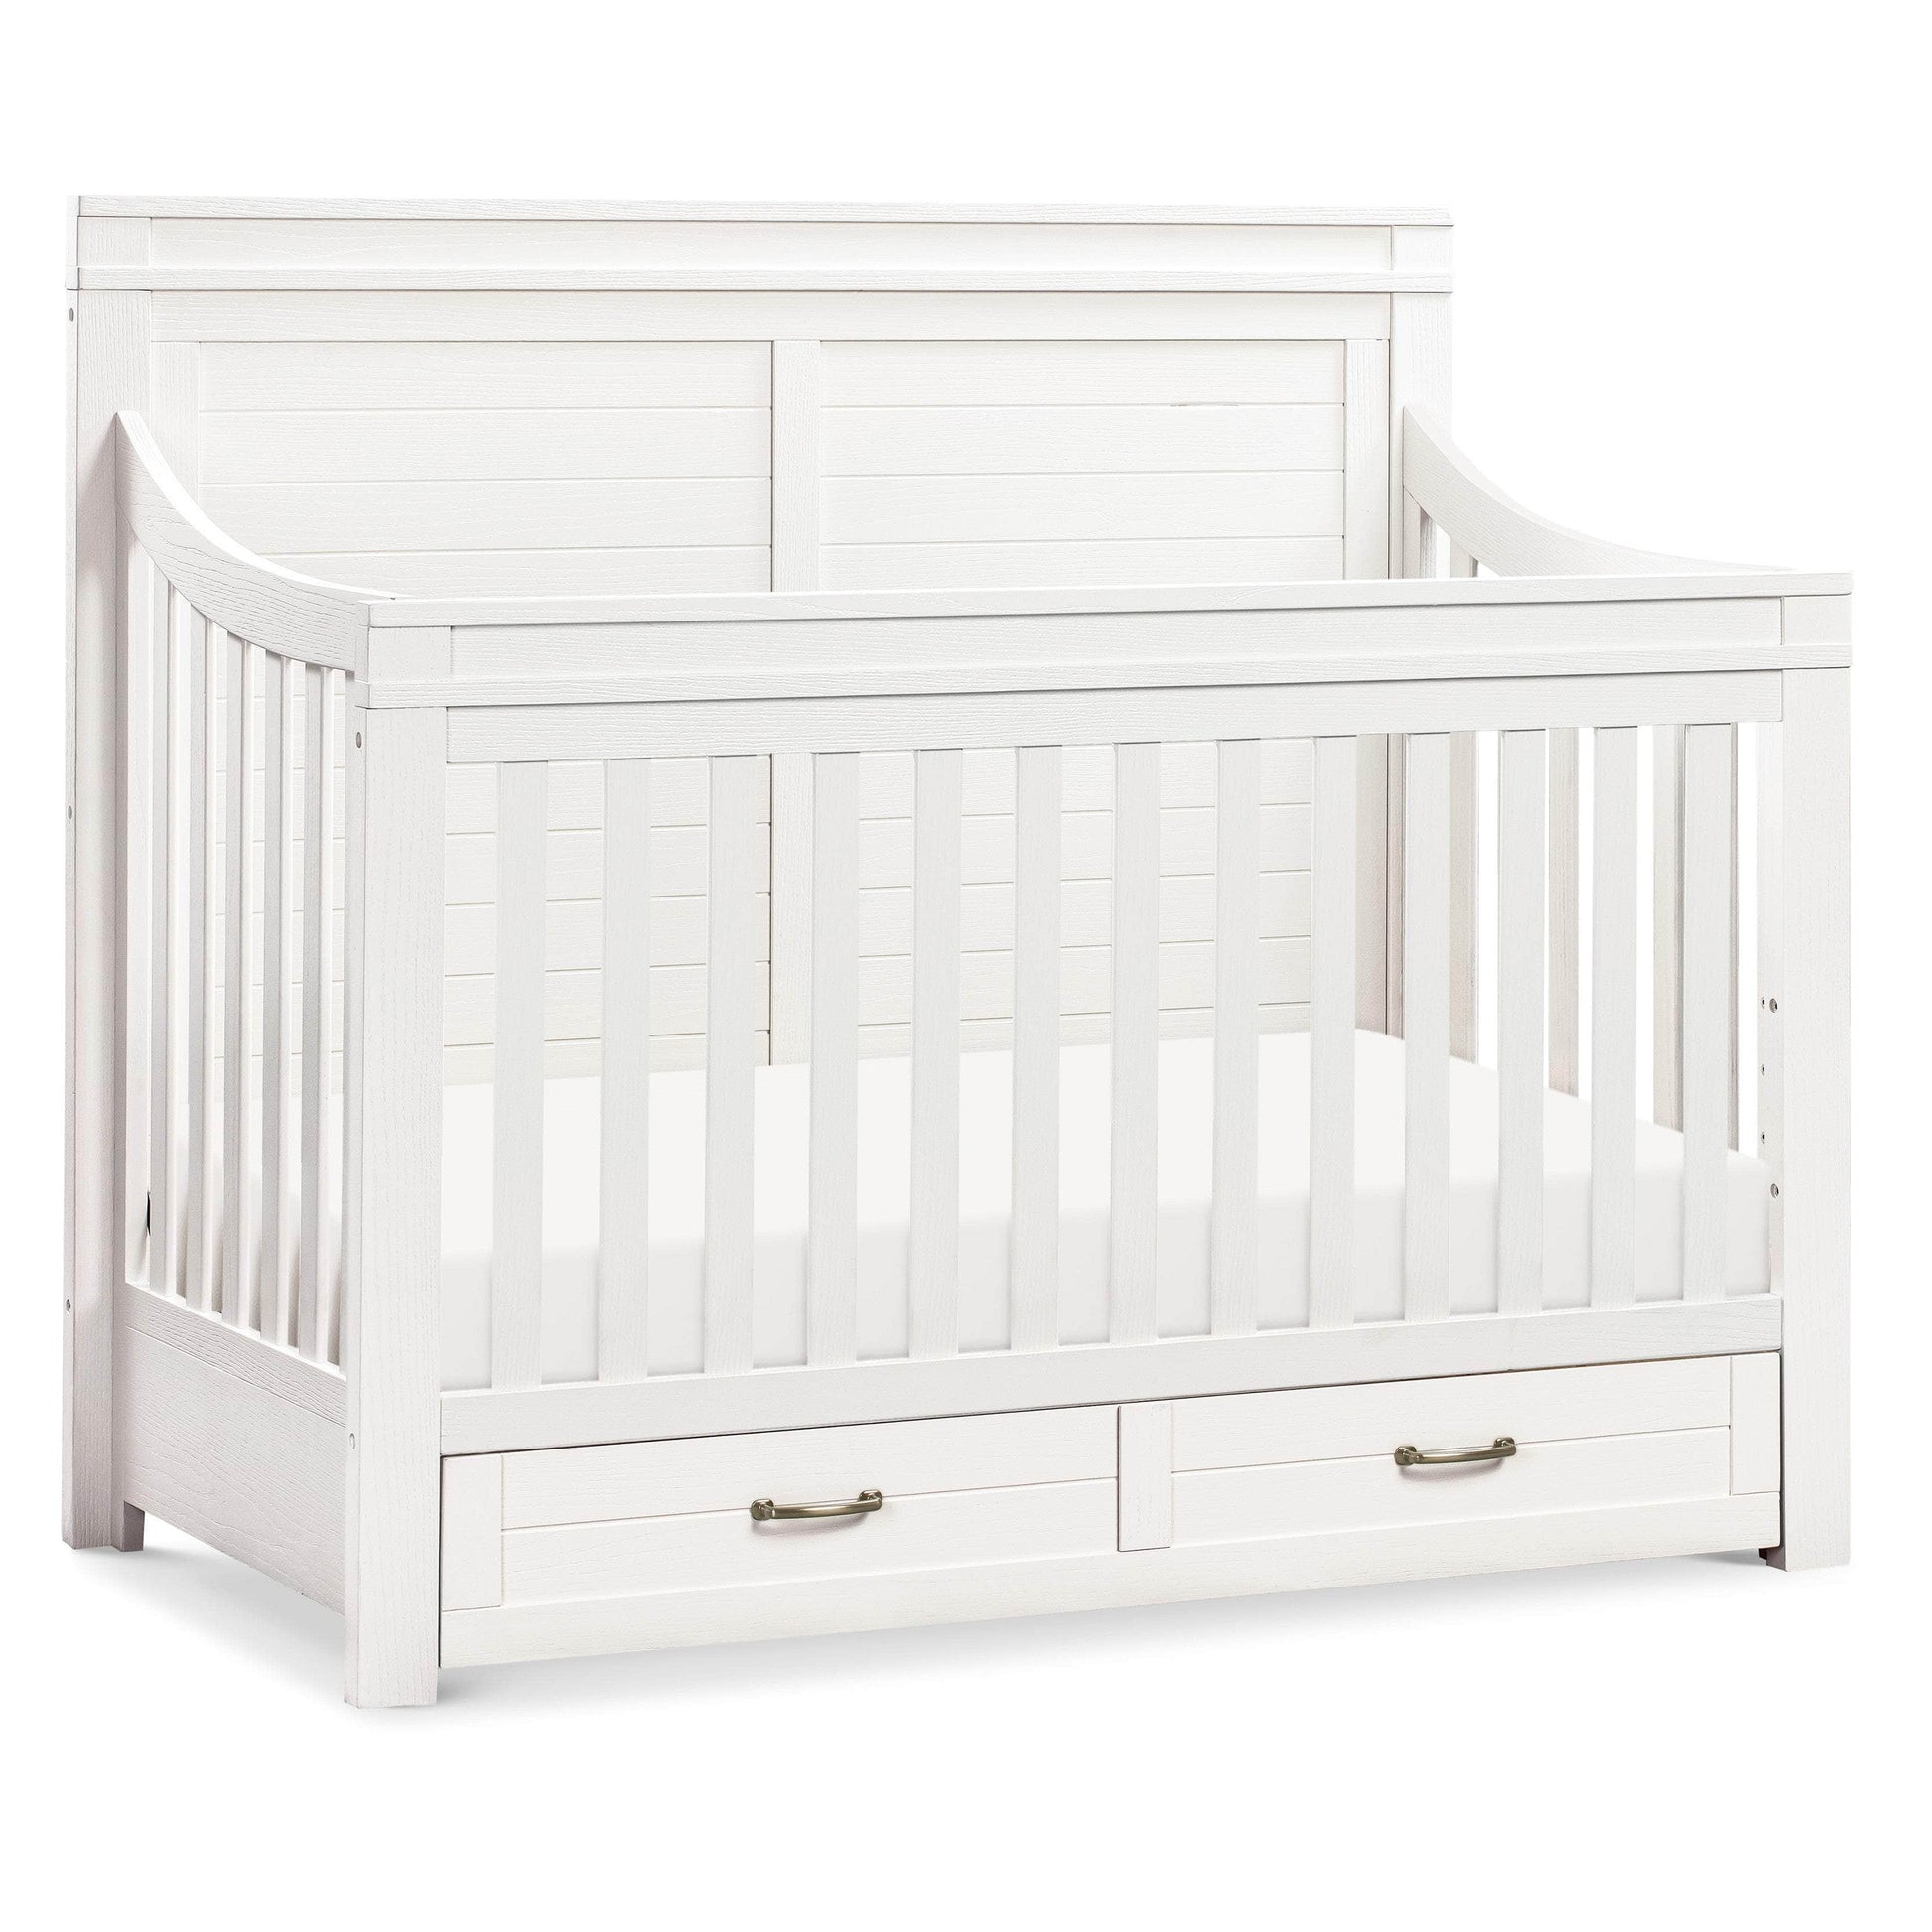 M21101HW,Wesley Farmhouse 4-in-1 Convertible Crib in Heirloom White